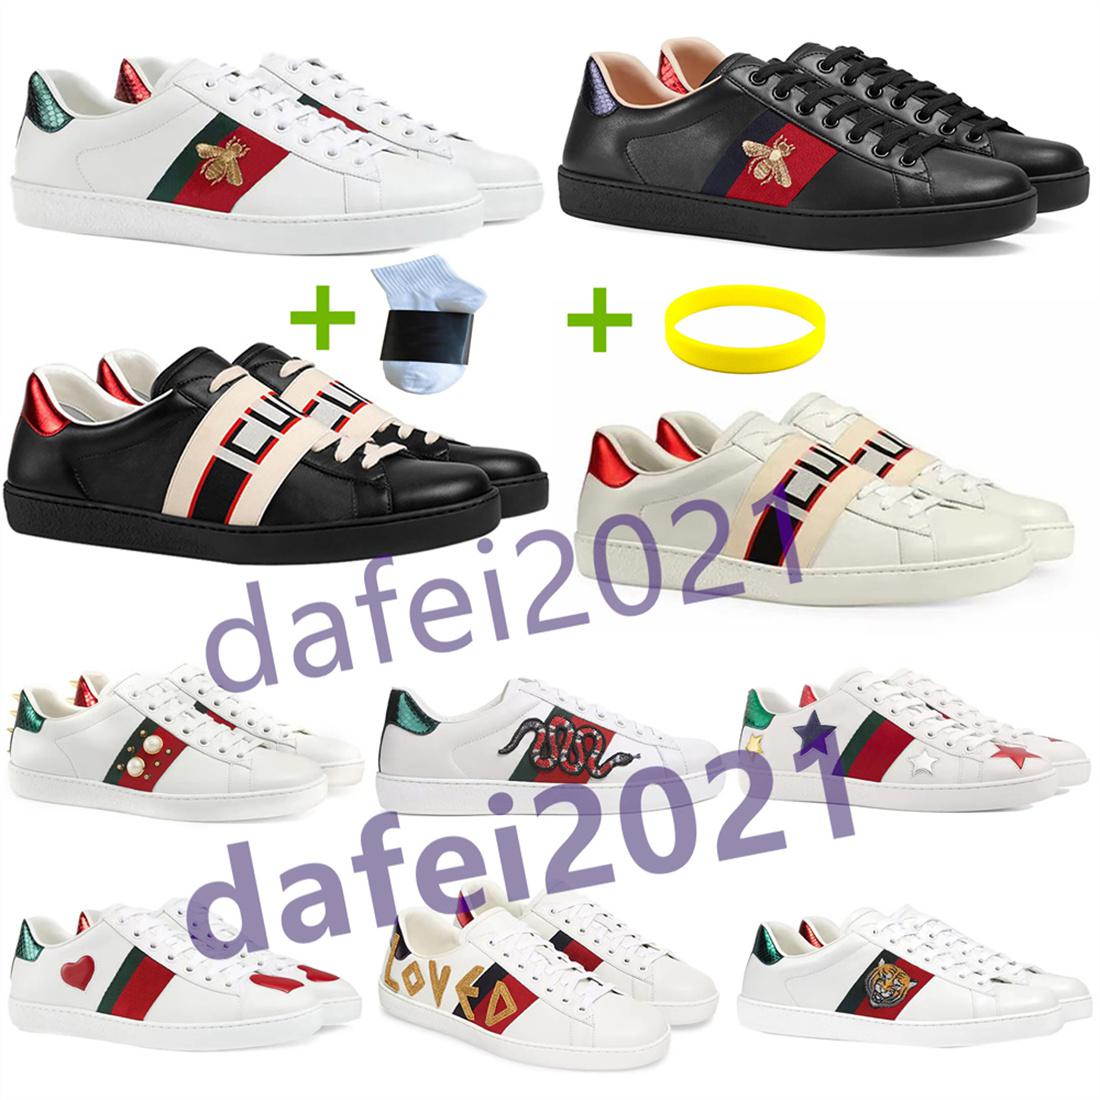 

Men Italy Bee Casual Shoes Women Fashion Leather Shoe Embroidered Green Red Stripe Tiger Snake Couples Trainers Des Chaussures, Shoelaces